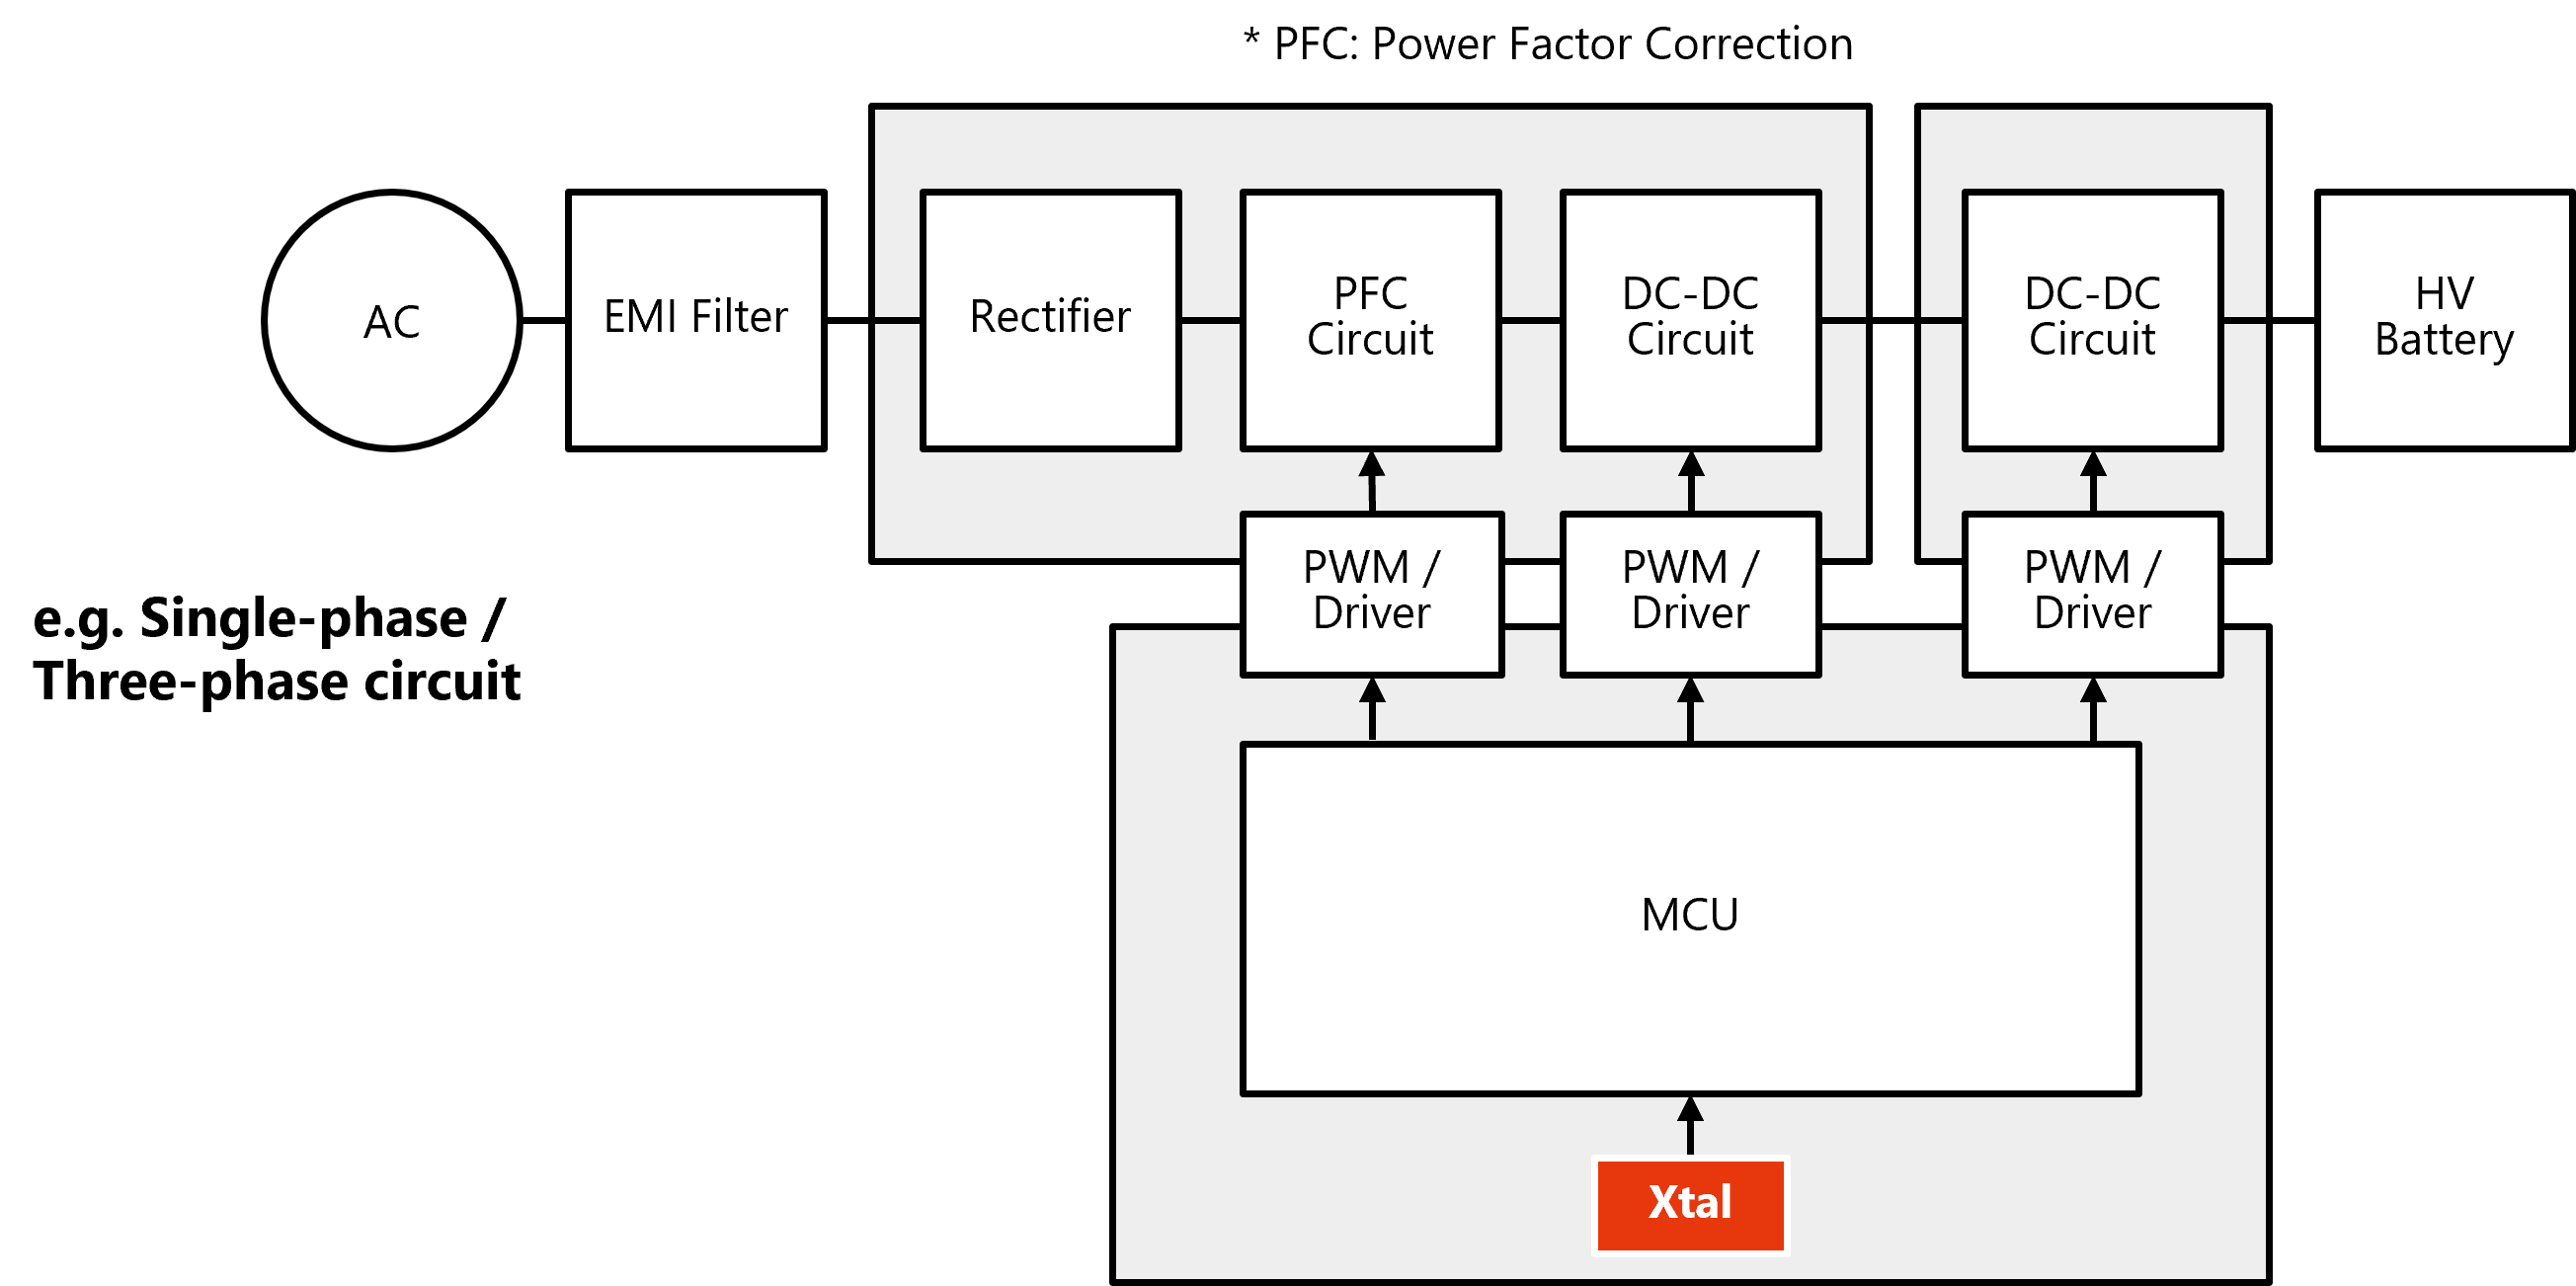 BlockDiagram_Electric_Charger_from_electrical_grid.png